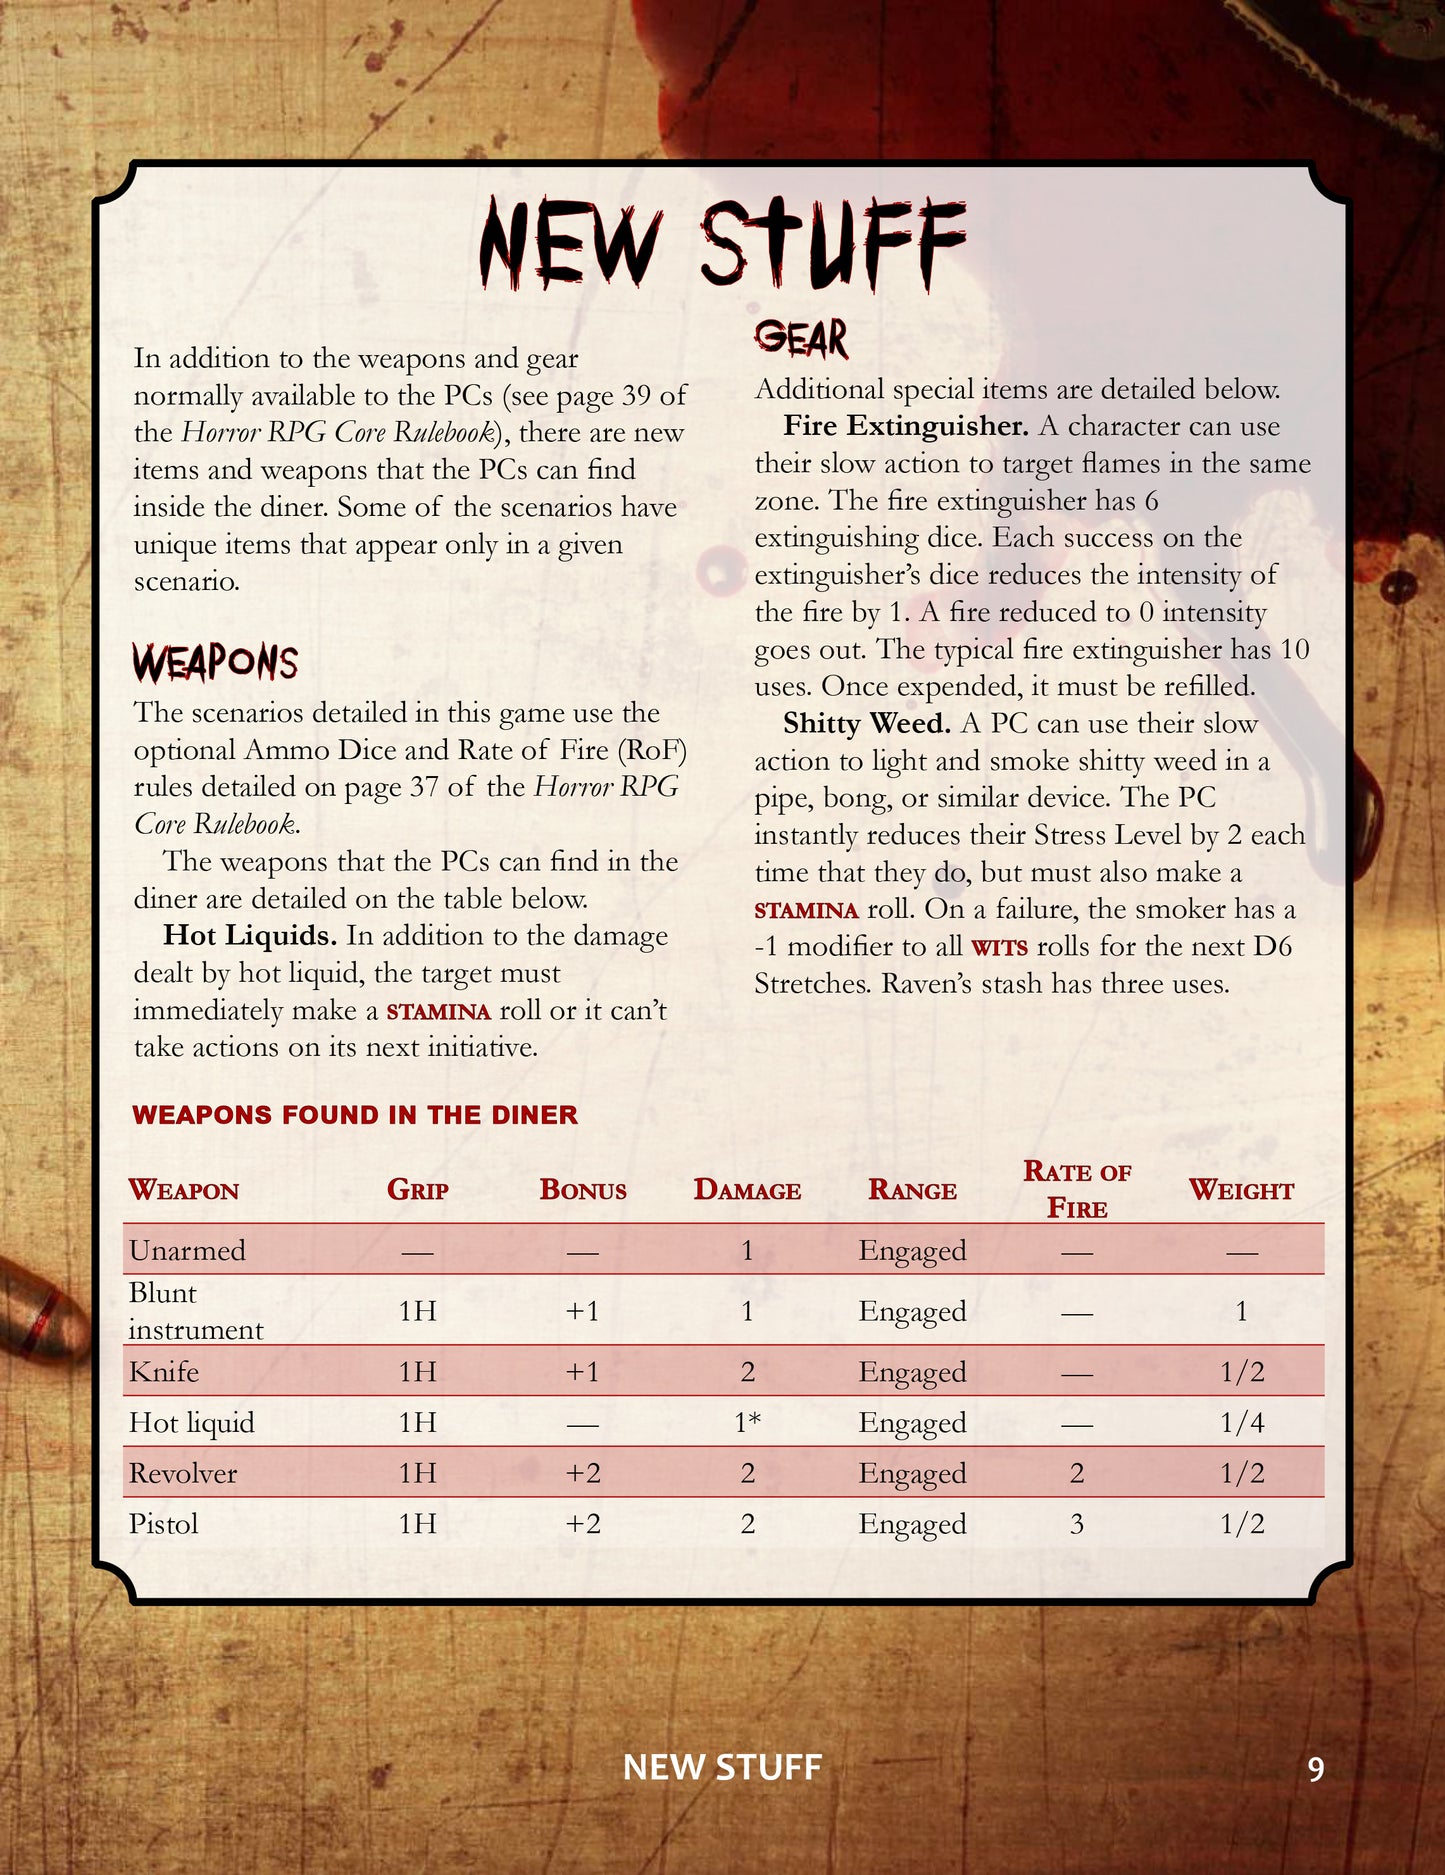 The Diner — A Scenario Book for the Horror RPG Physical Book